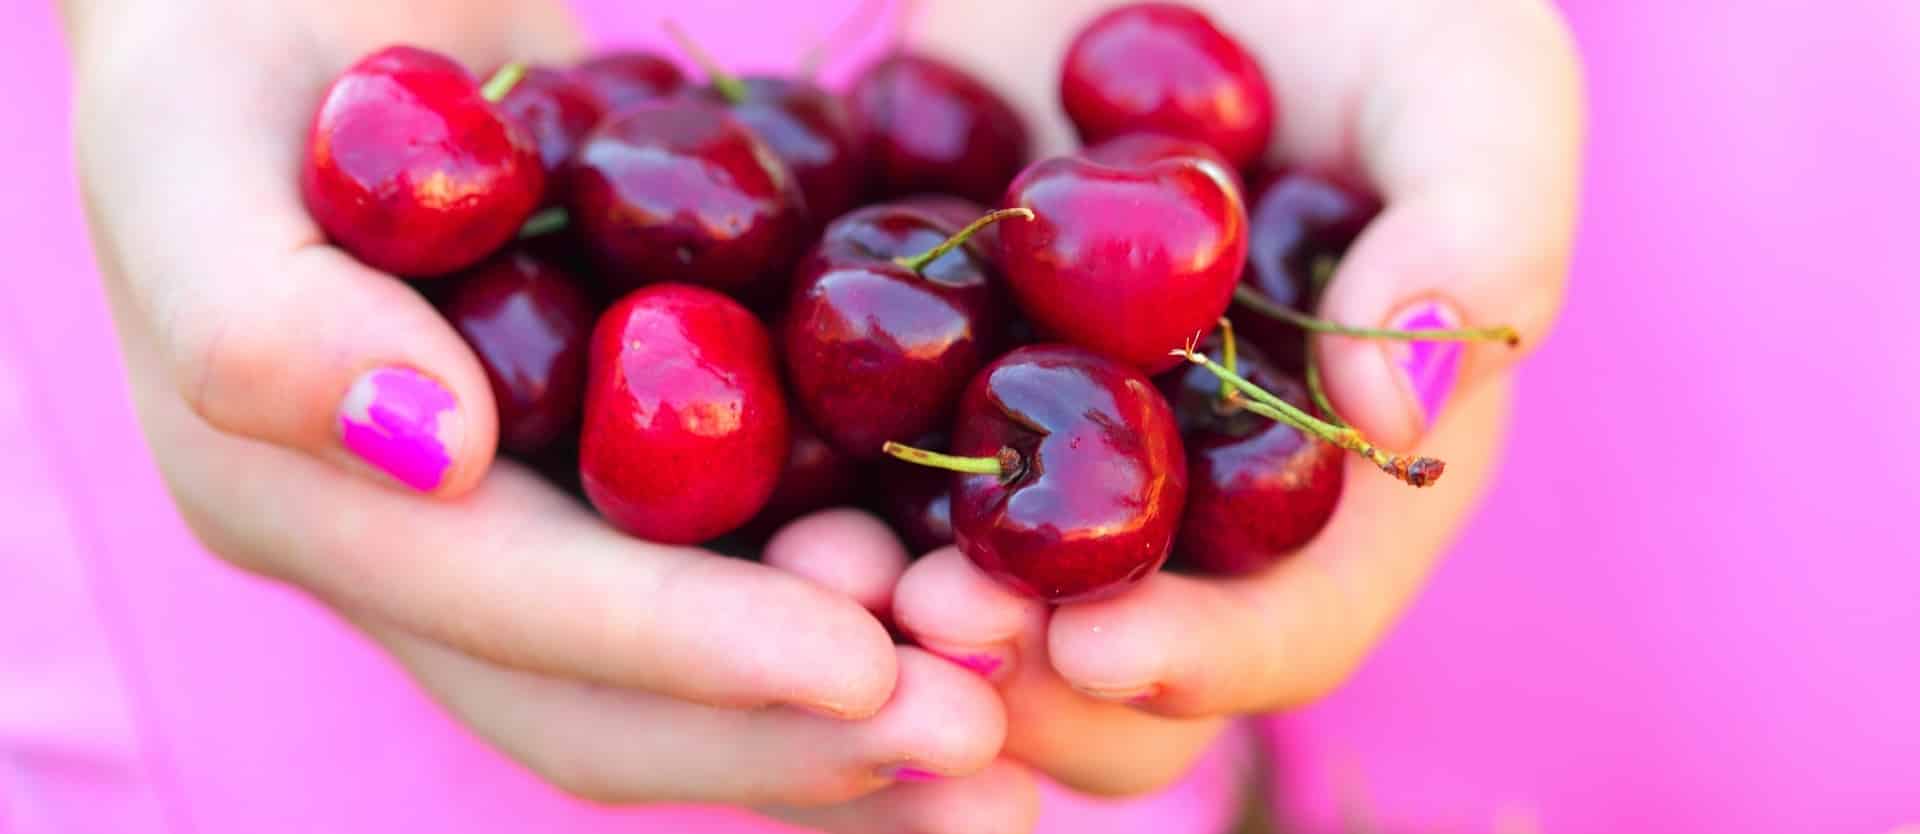 Gout Treatment with a Cherry on Top